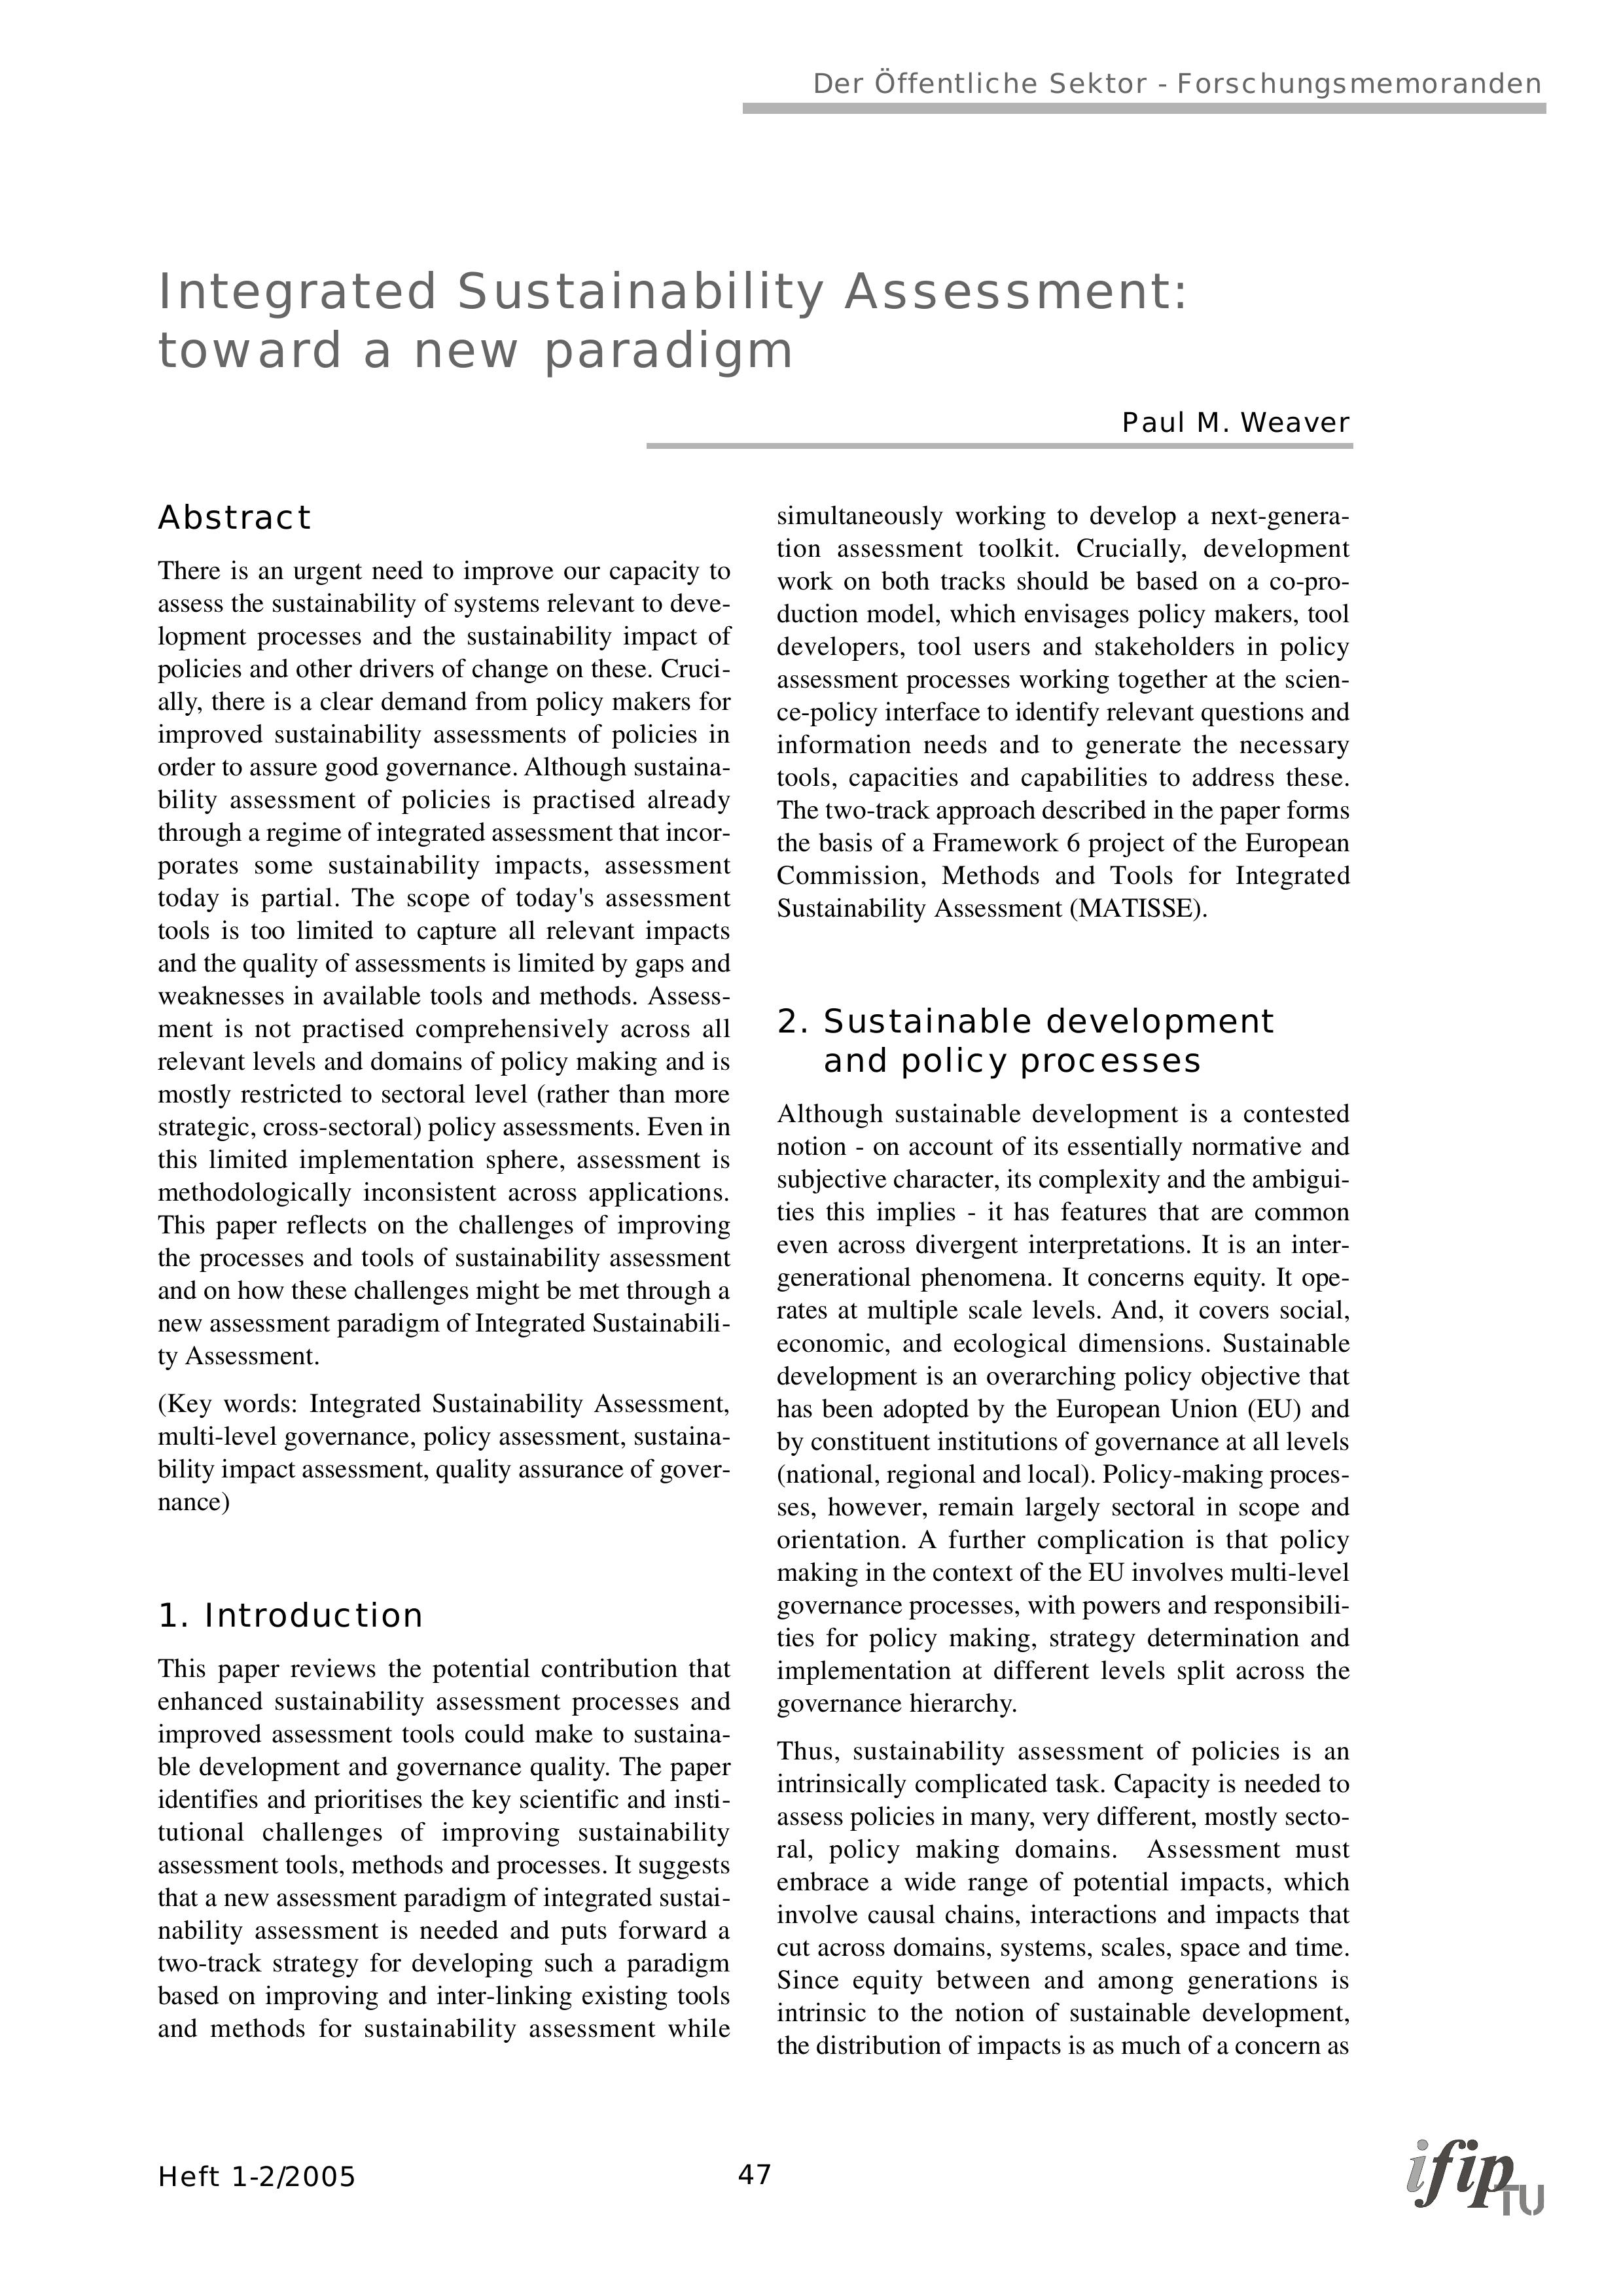 Integrated Sustainability Assessment: toward a new paradigm